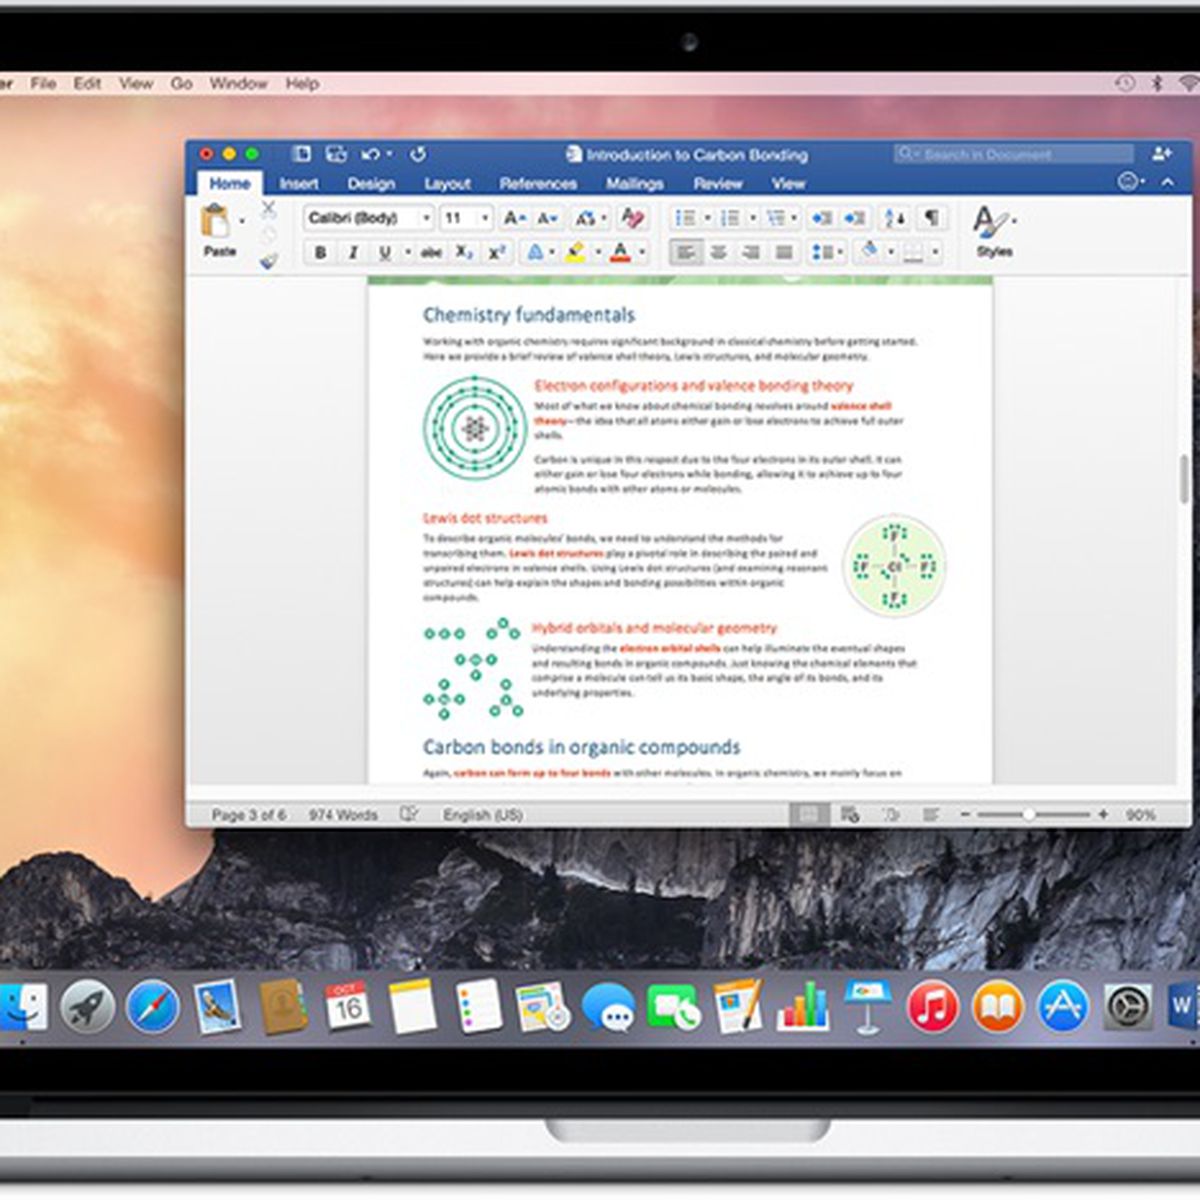 64bit version of microsft office for mac